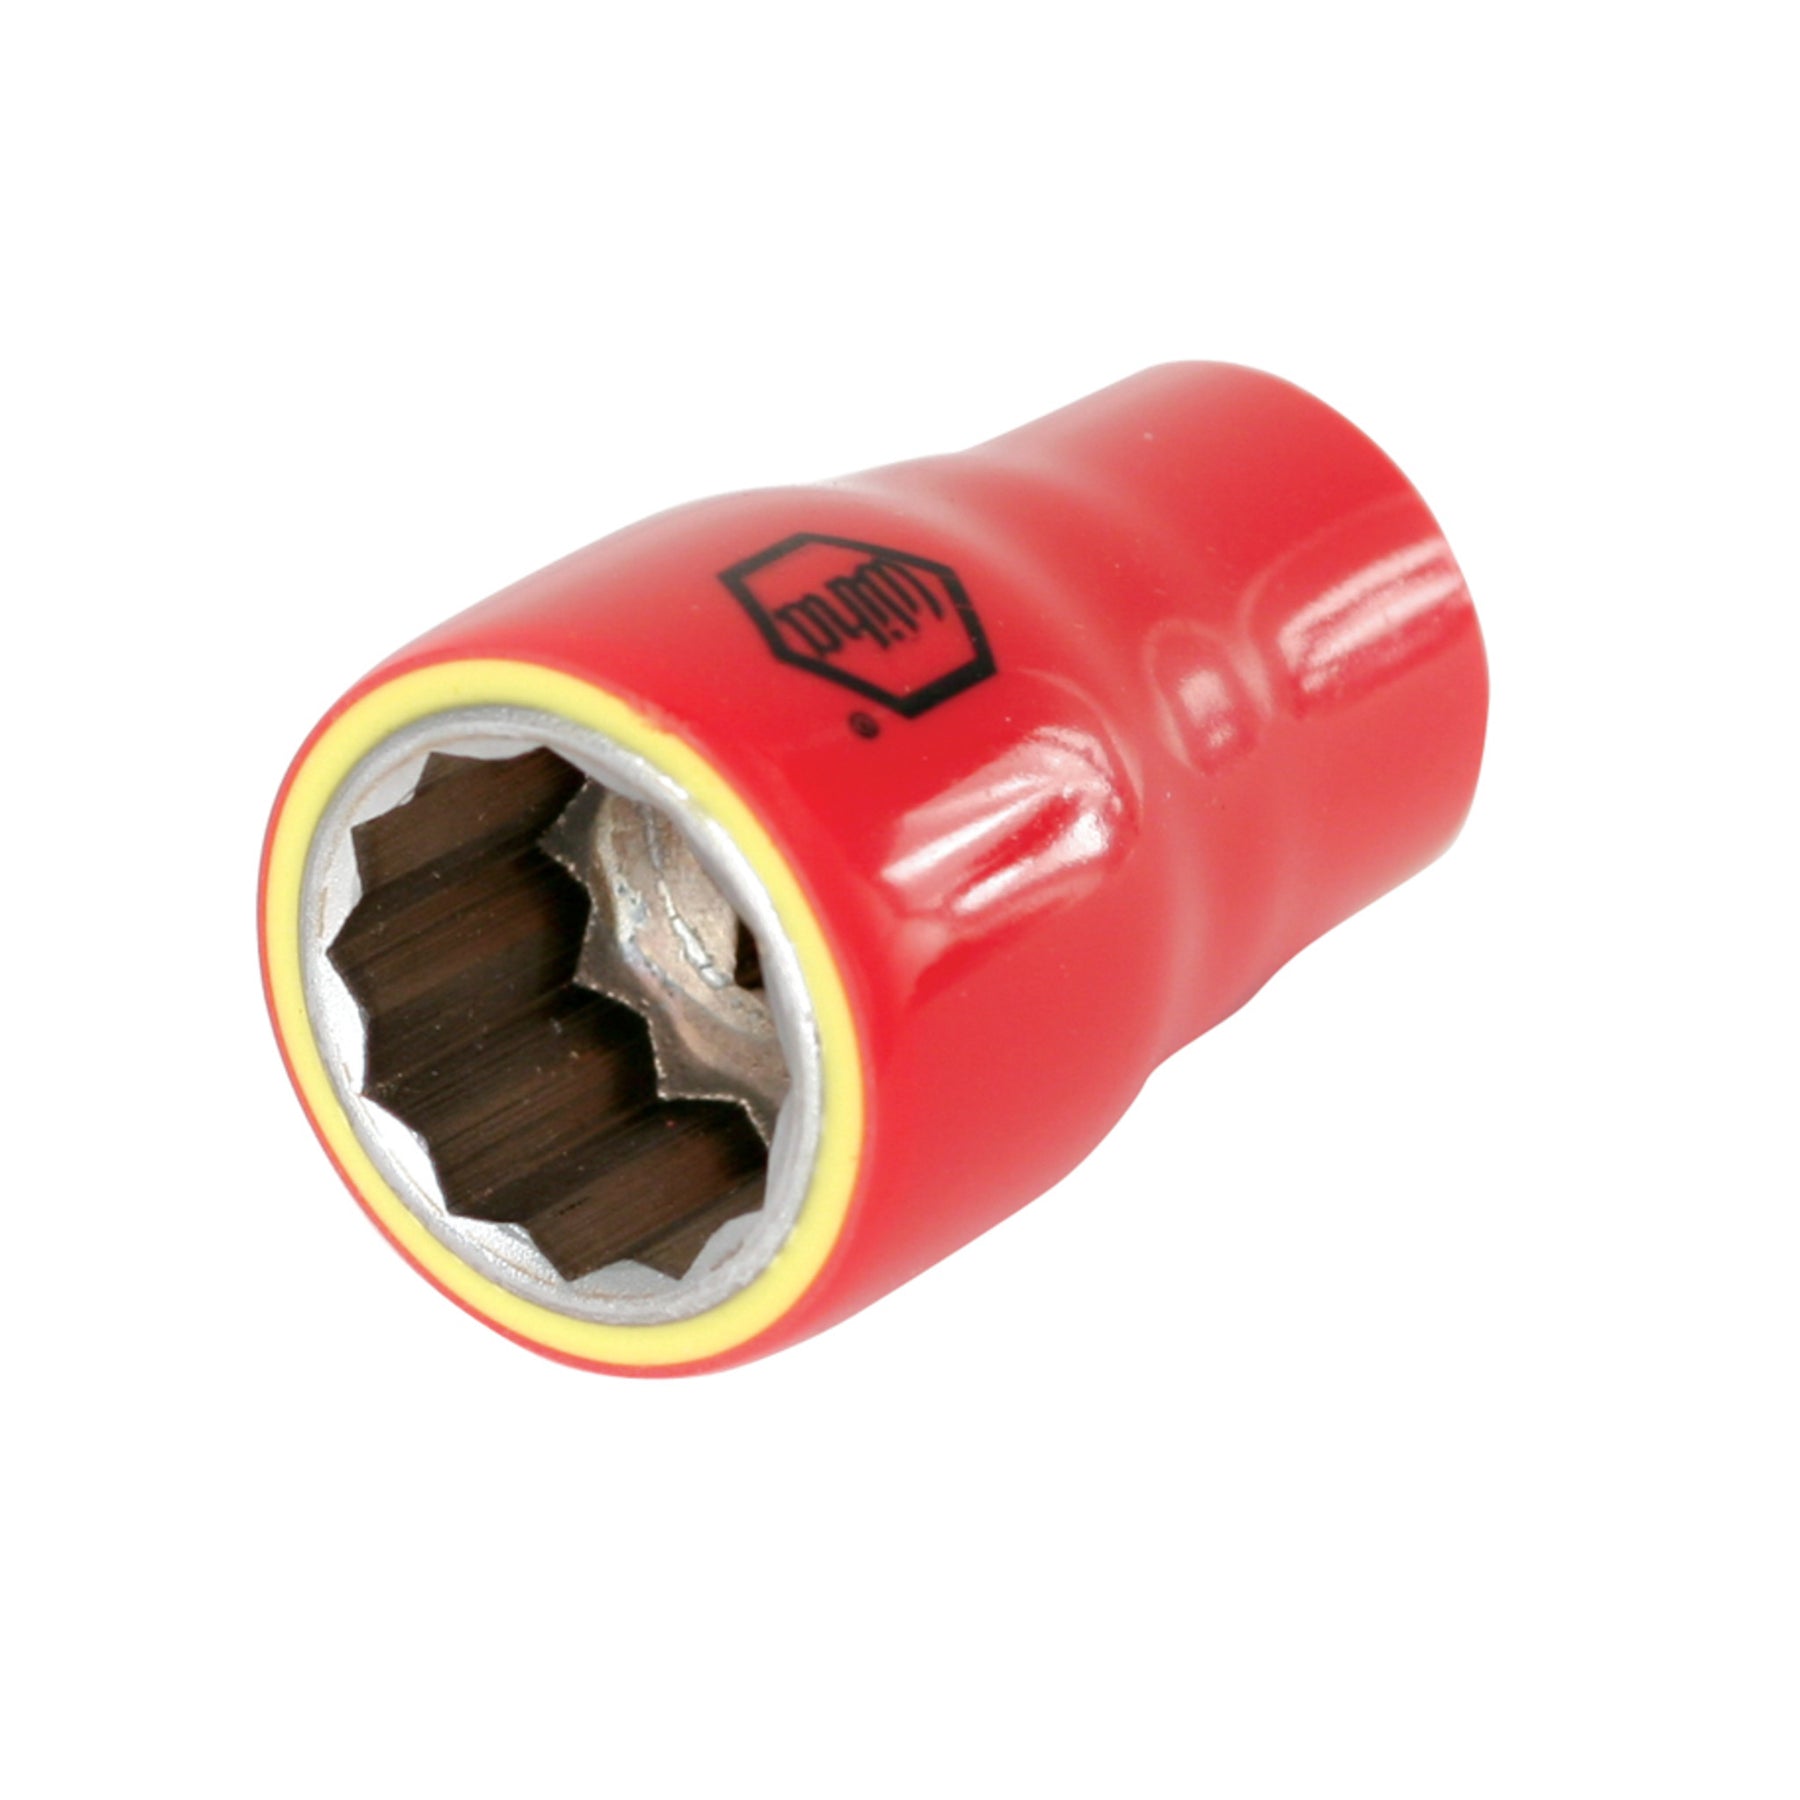 Insulated Socket 1/2" Drive 27mm